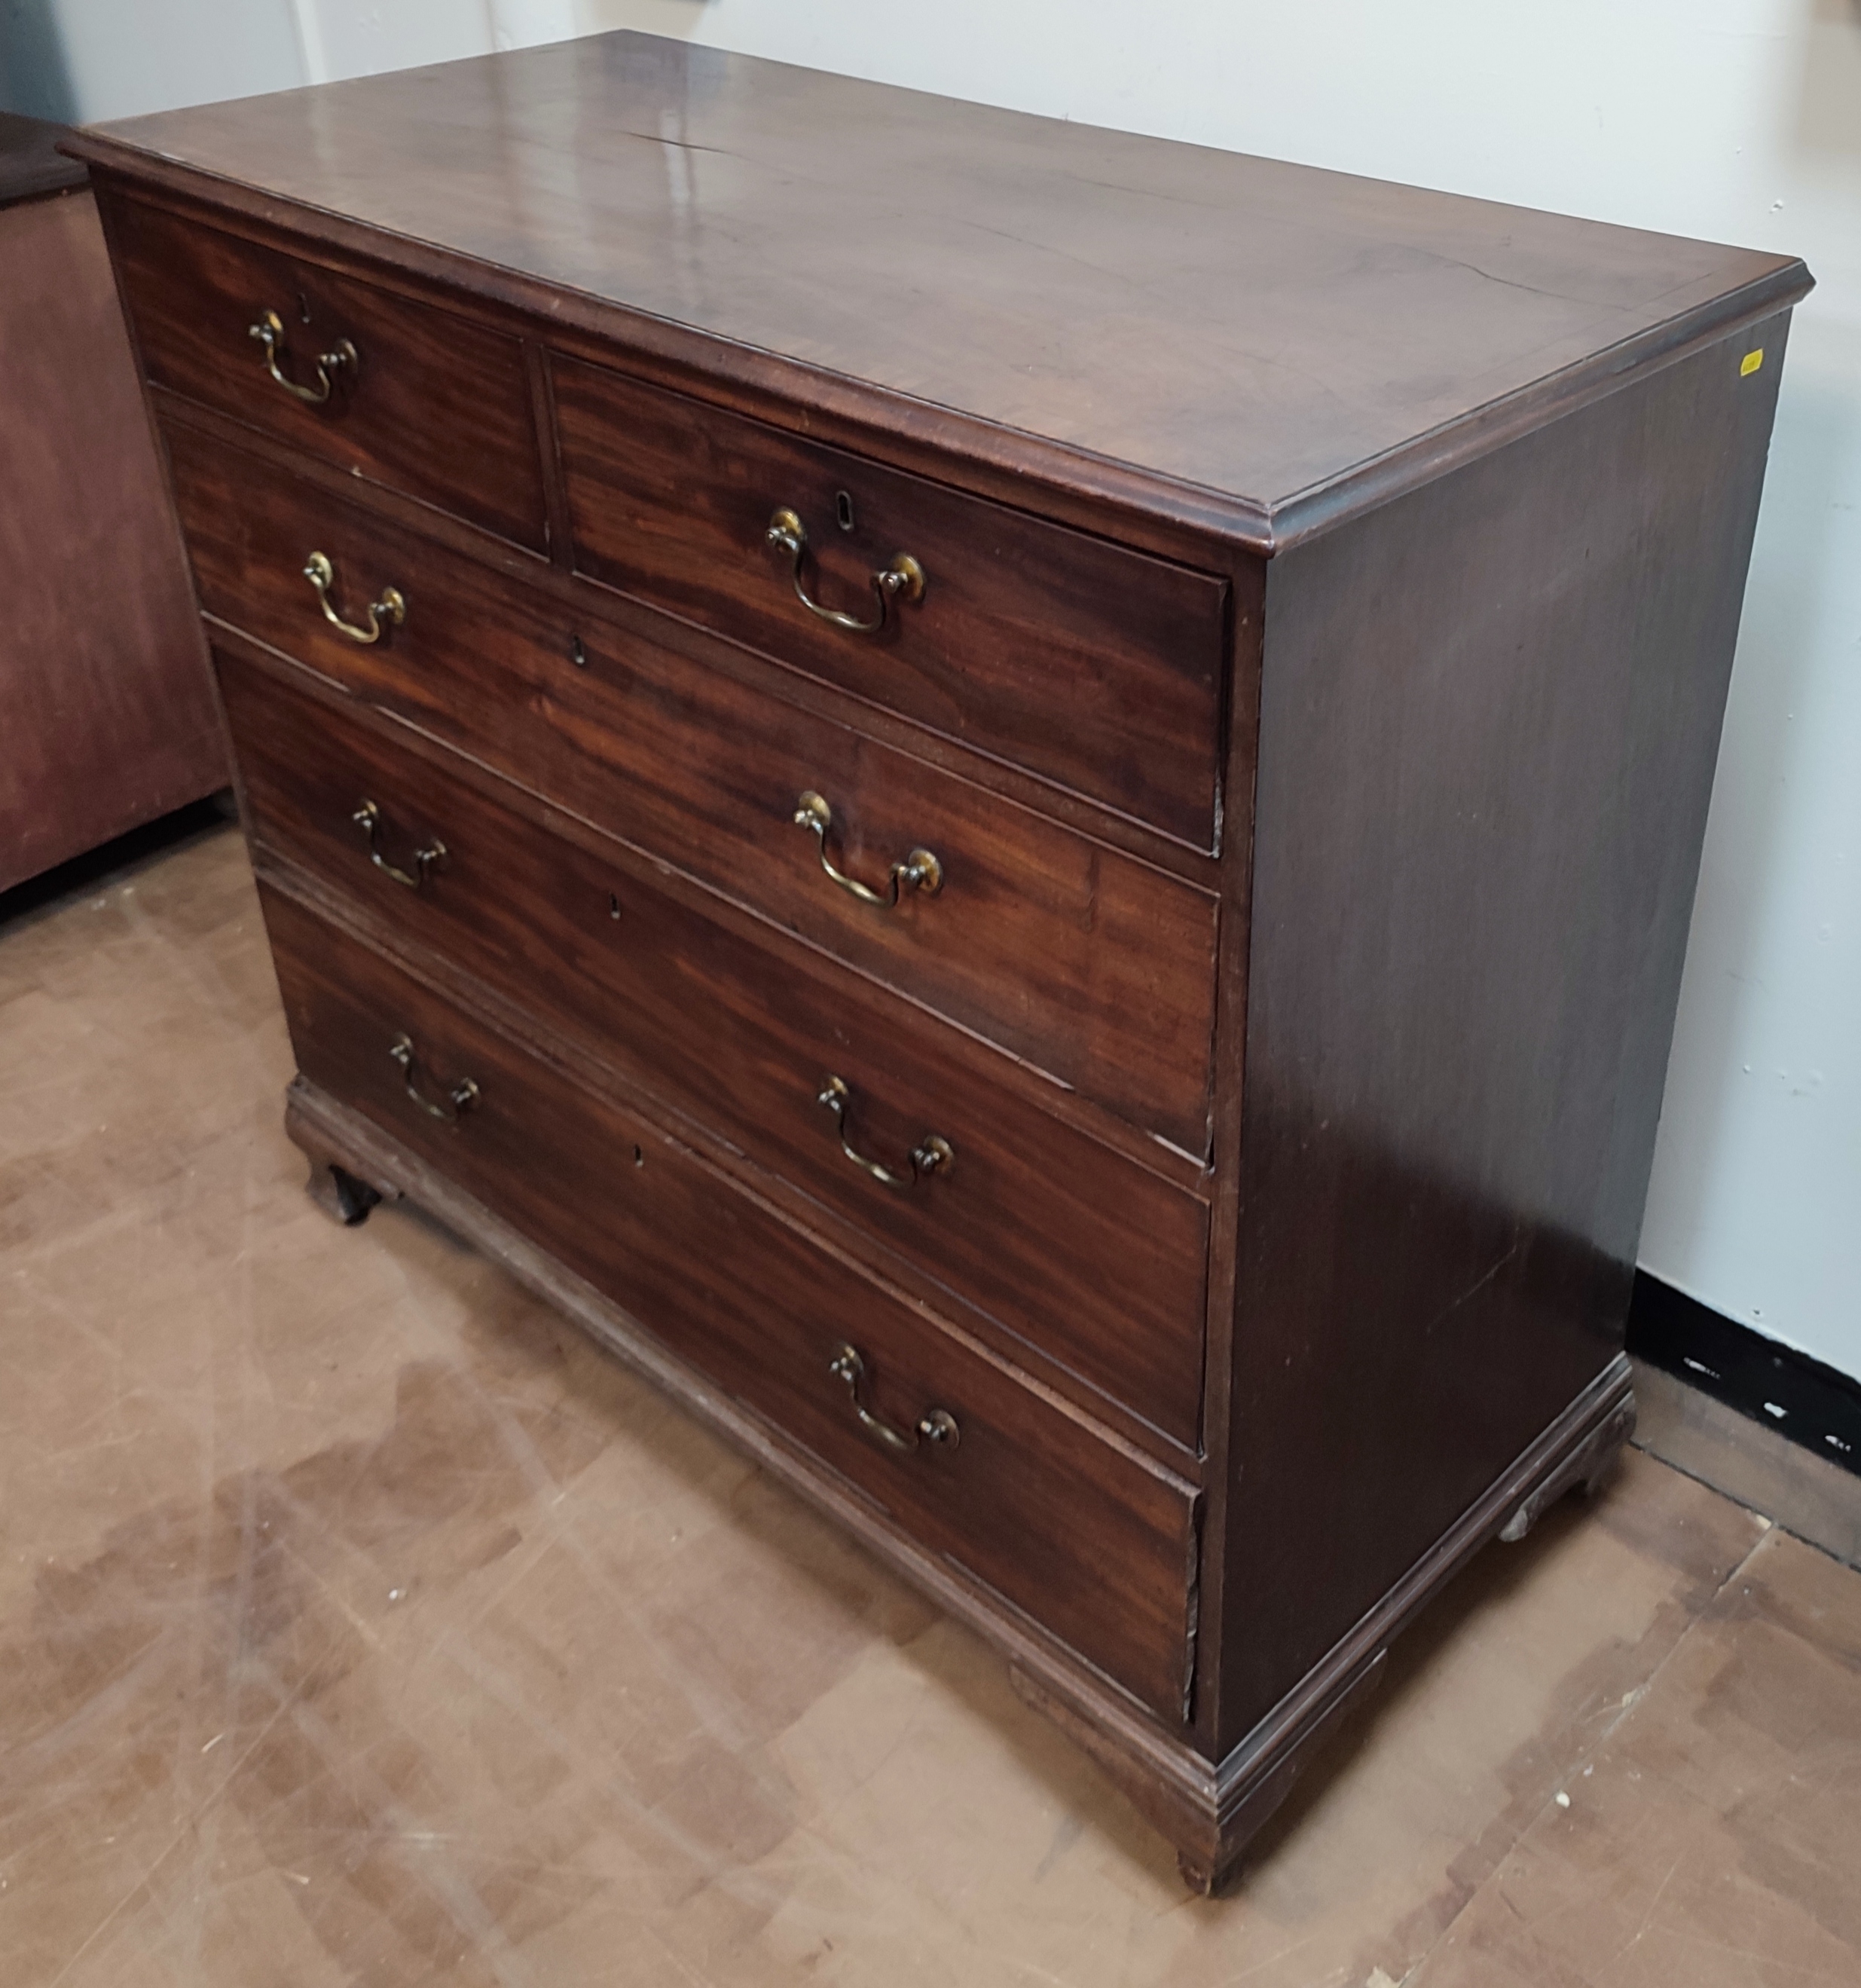 Georgian Mahogany chest of five drawers with brass swan neck handles 117 x 54 x 105 cm - Image 3 of 3